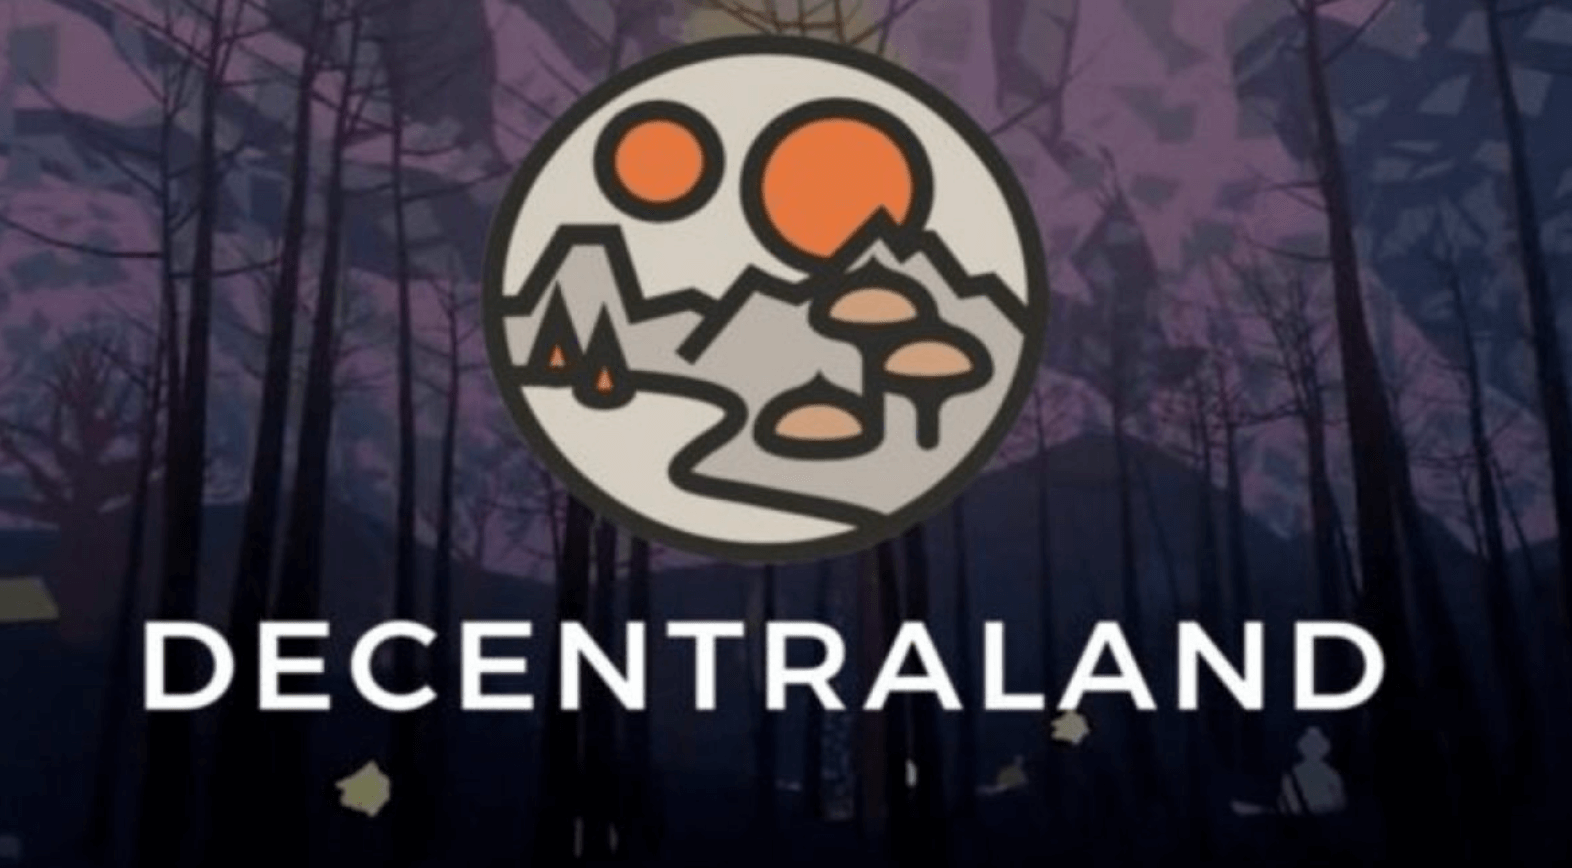 How to Buy Decentraland Coin?